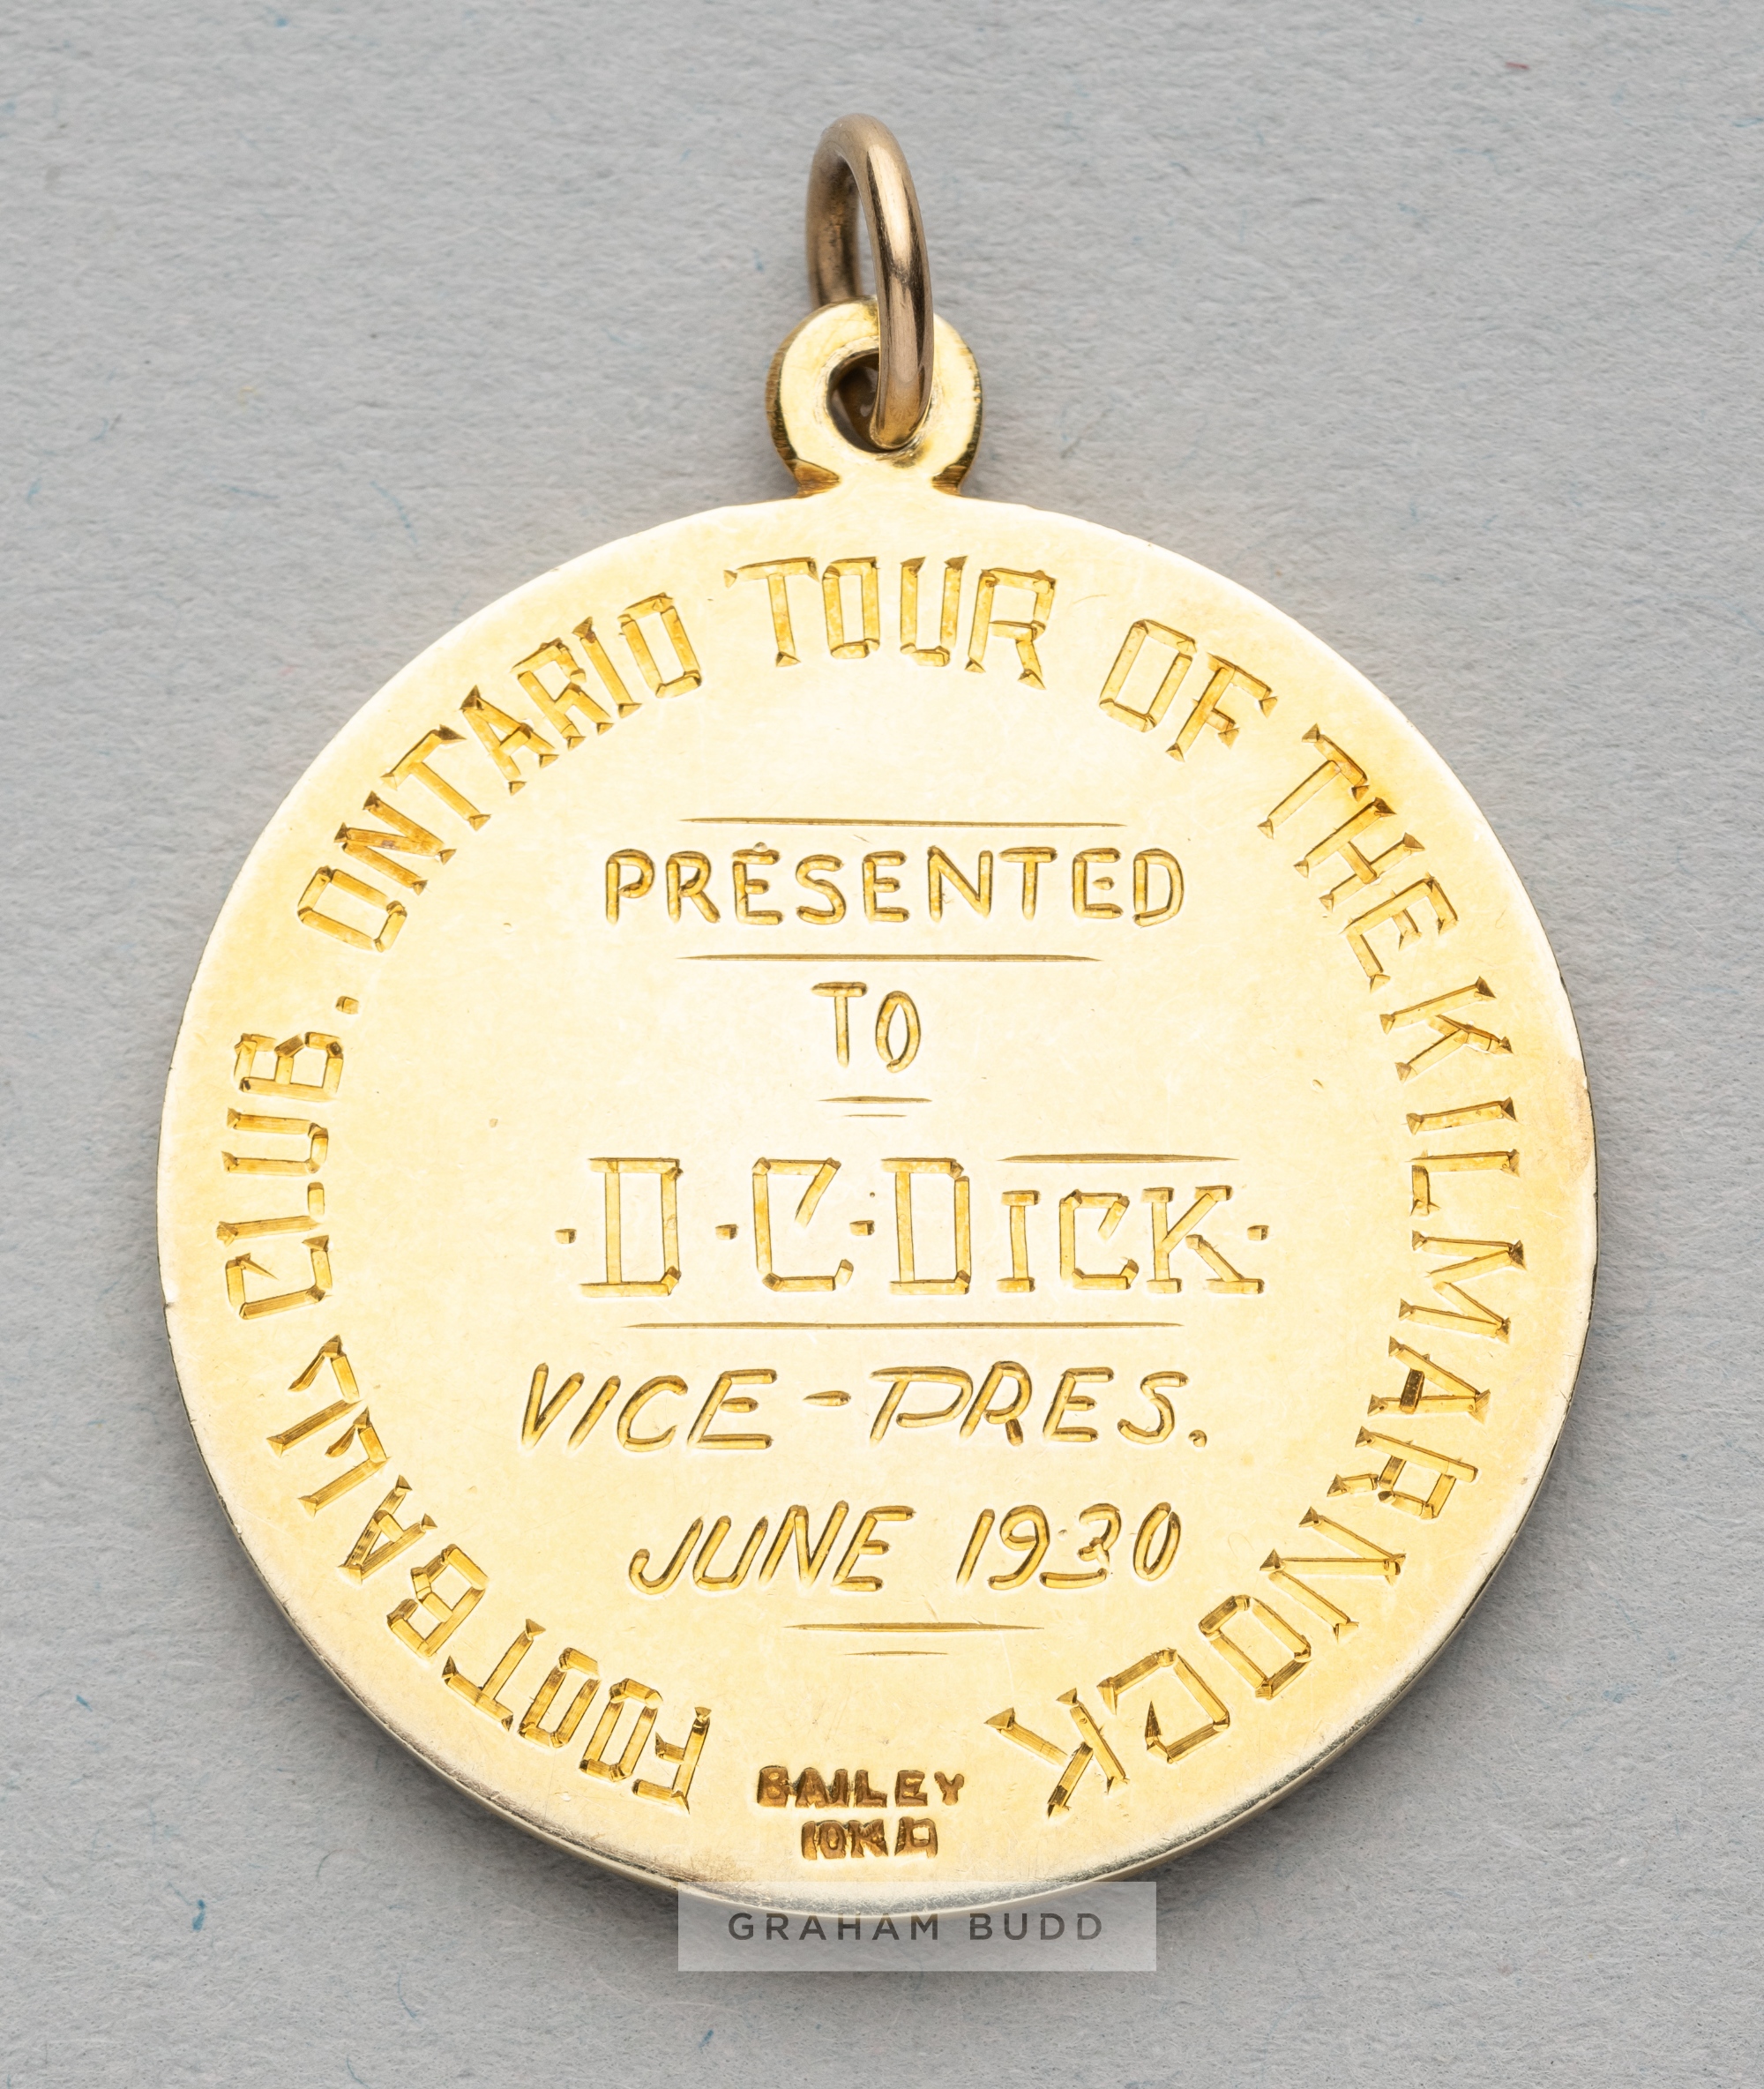 Ontario Football Association medal awarded to Kilmarnock Vice President D.C. Dick for the Canadian